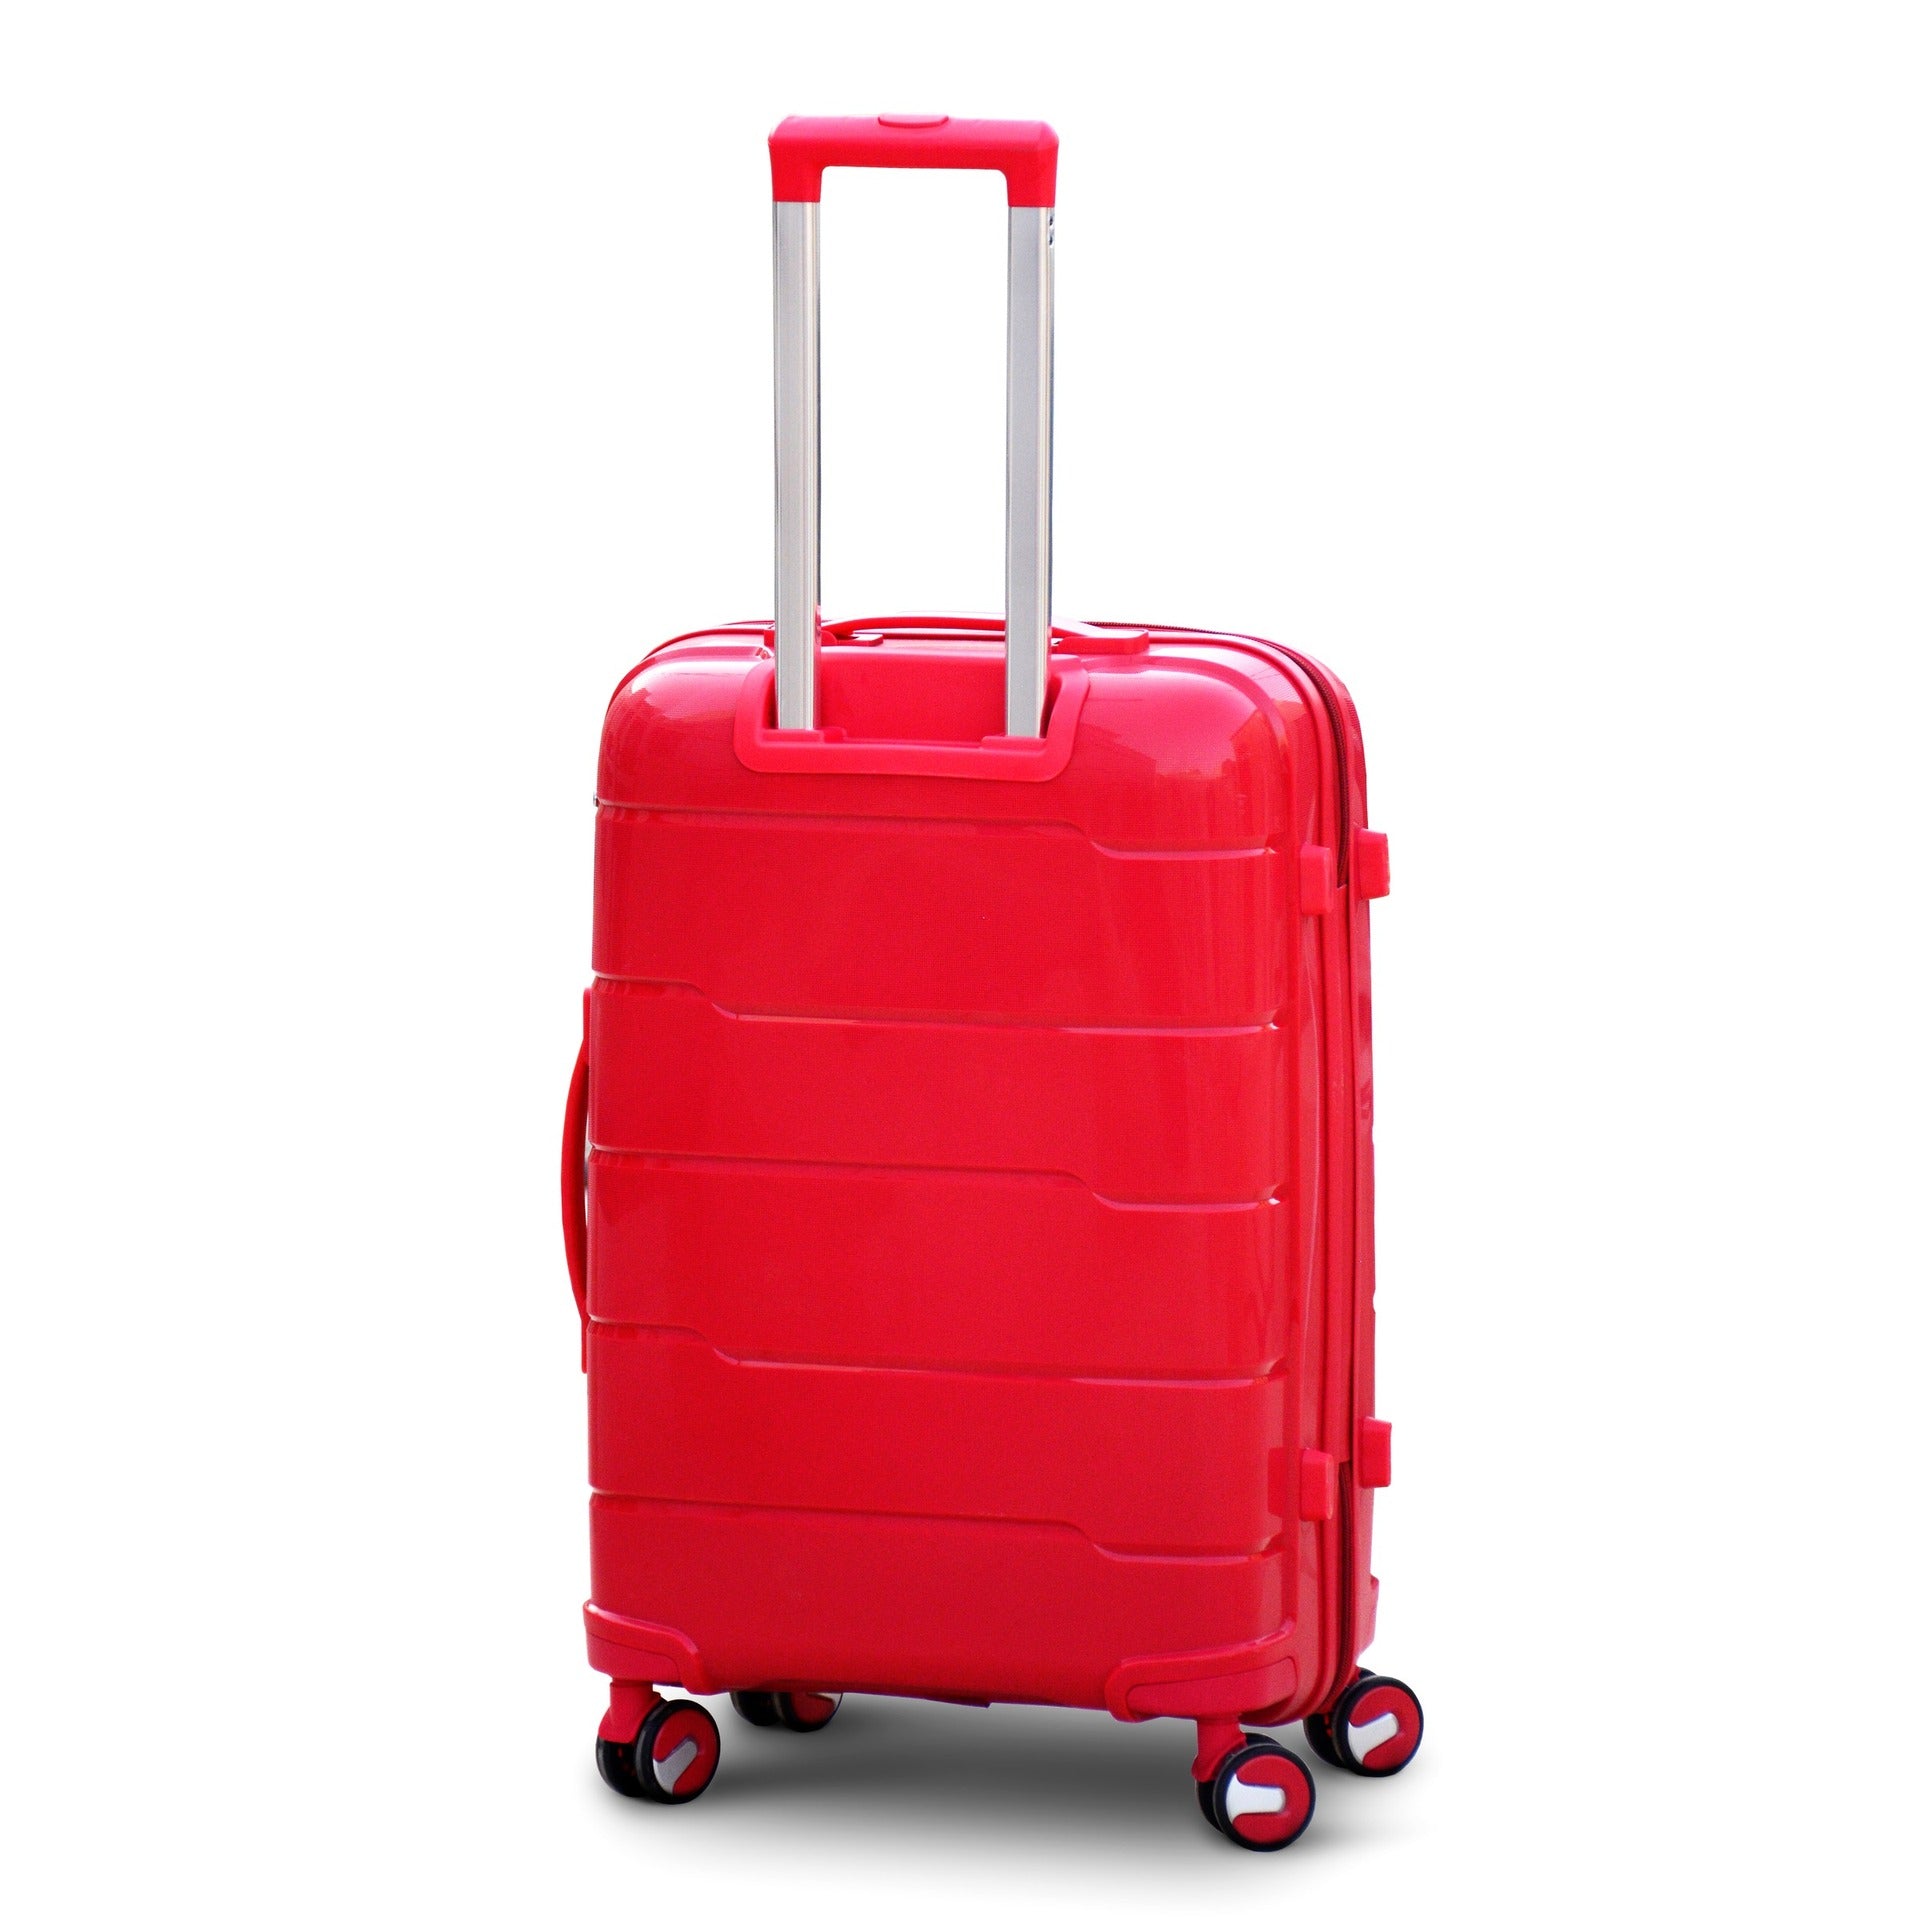 4 Piece Full Set 7" 20" 24" 28 Inches Red Colour Ceramic Smooth PP Luggage Hard Case Trolley Bag with Double Spinner Wheel